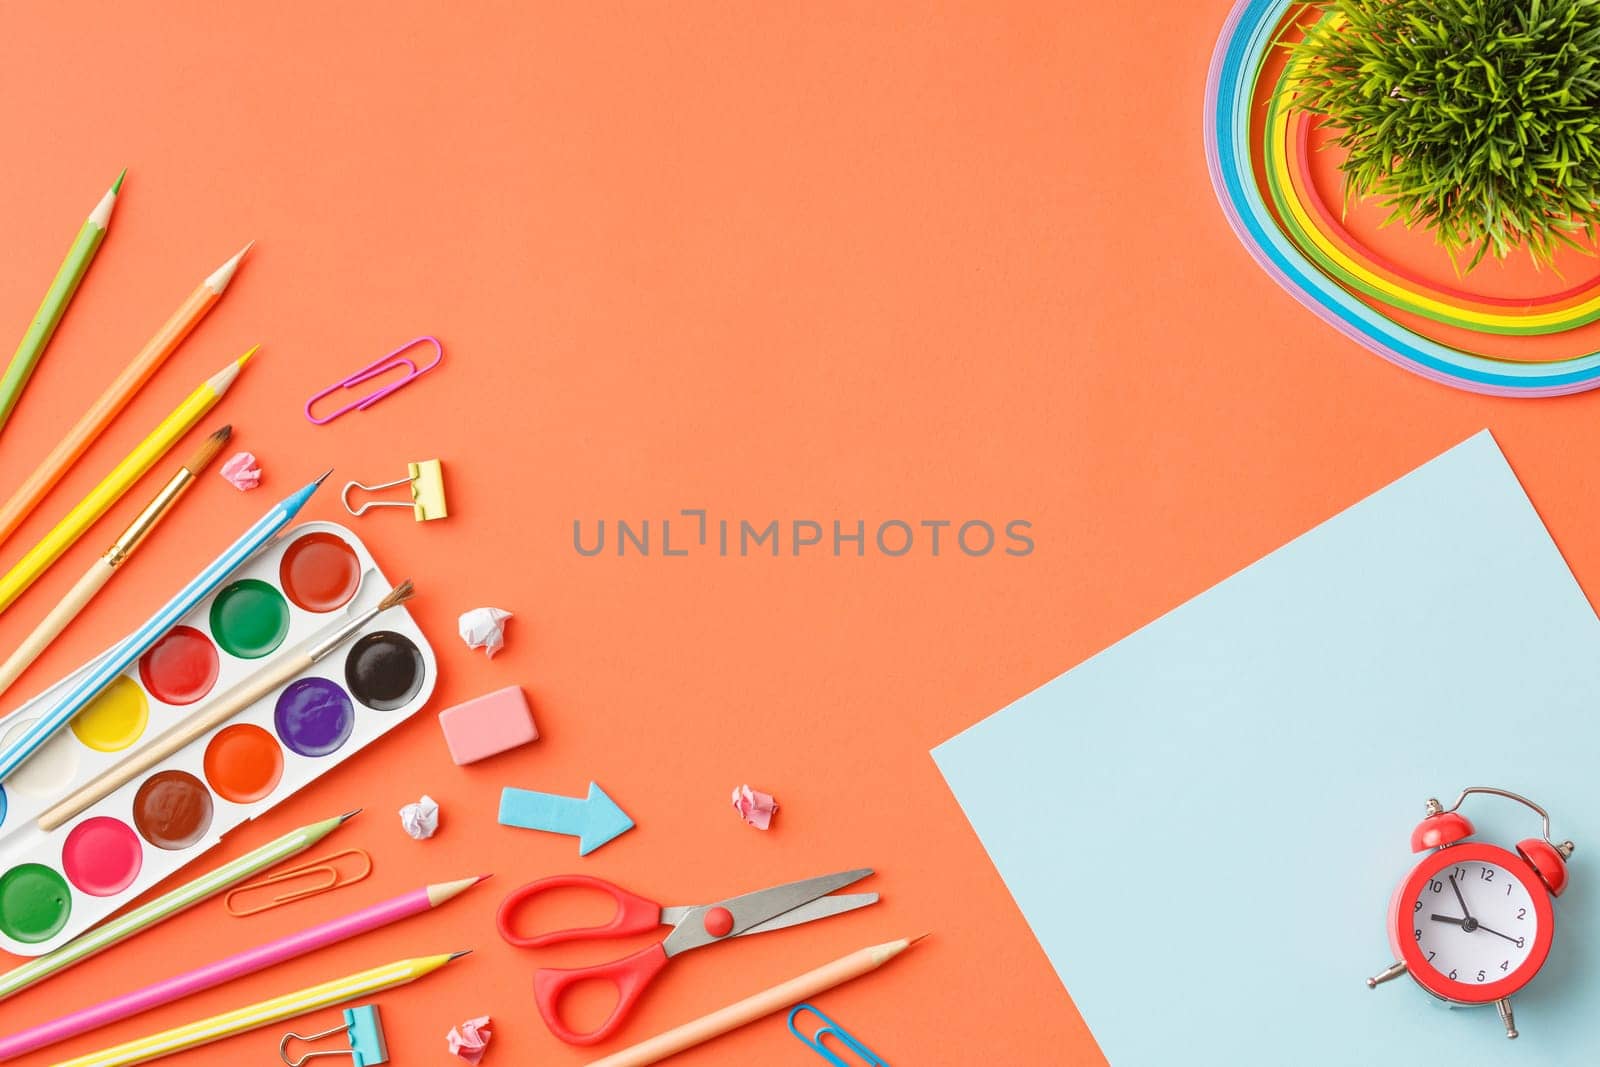 Paints, colored pencils, scissors, paper clips, rubber bands. Painting tools. Stationery. Bright collage, top view concept of a creative work table.